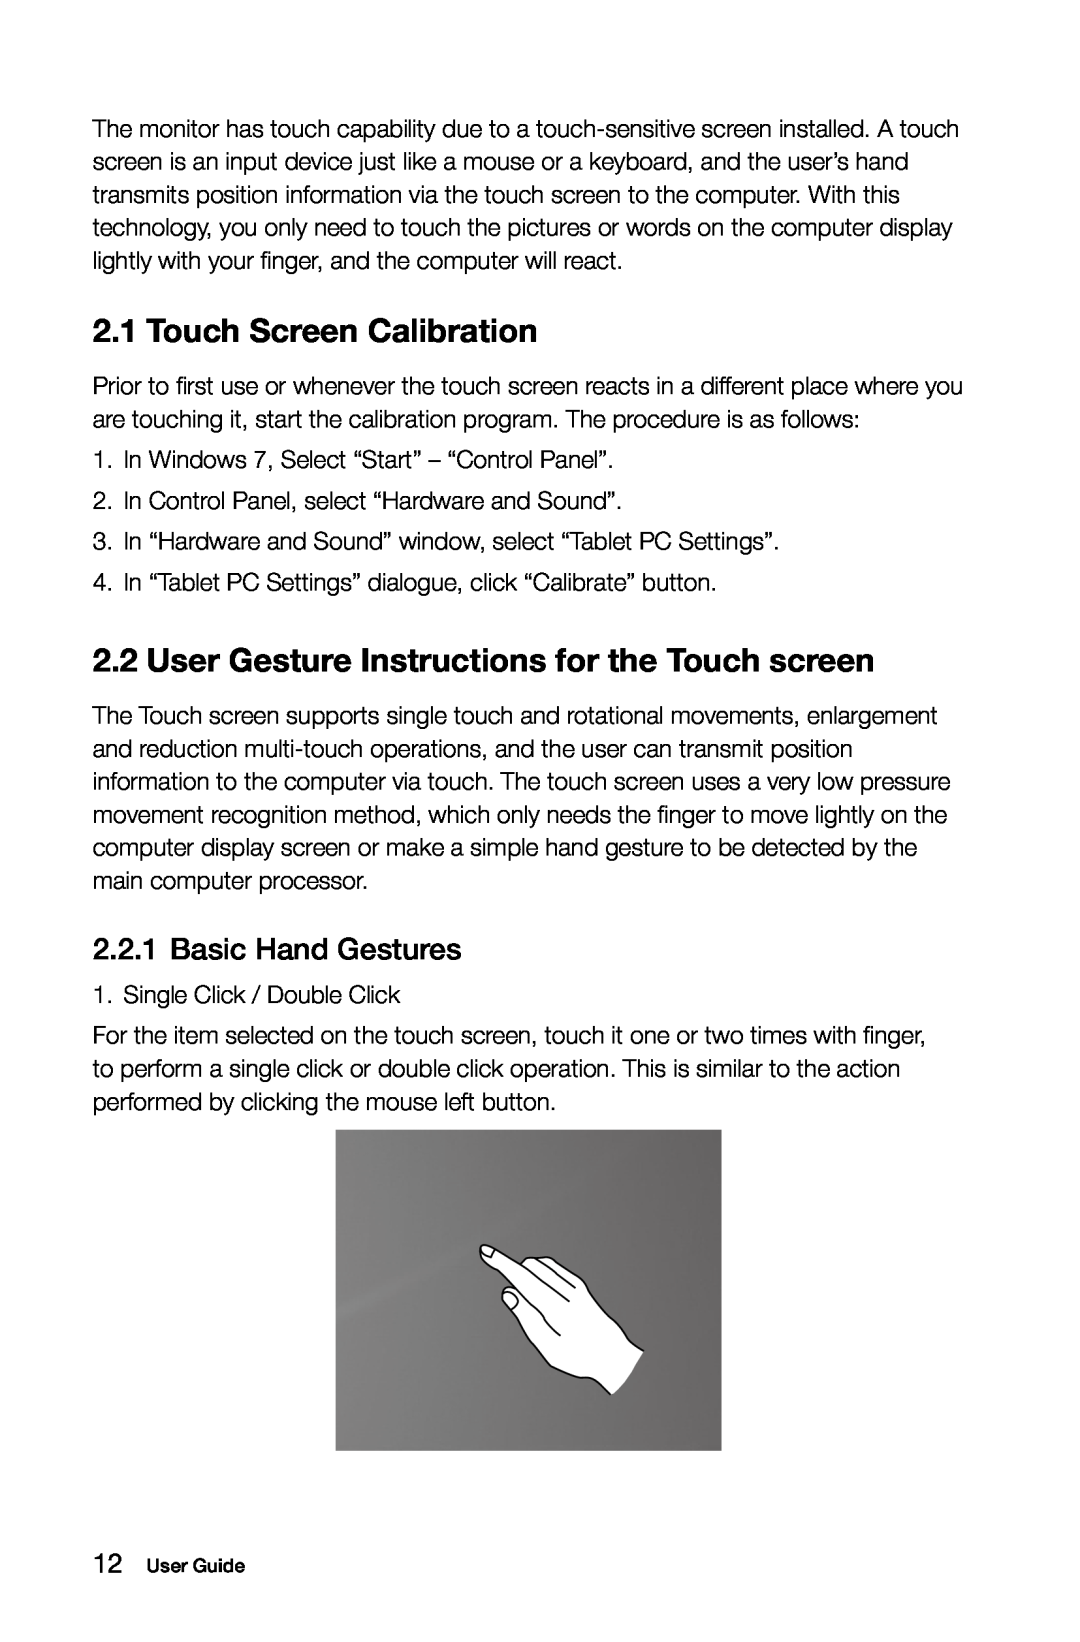 Lenovo 2568 [B540] 10101, 97 Touch Screen Calibration, User Gesture Instructions for the Touch screen, Basic Hand Gestures 